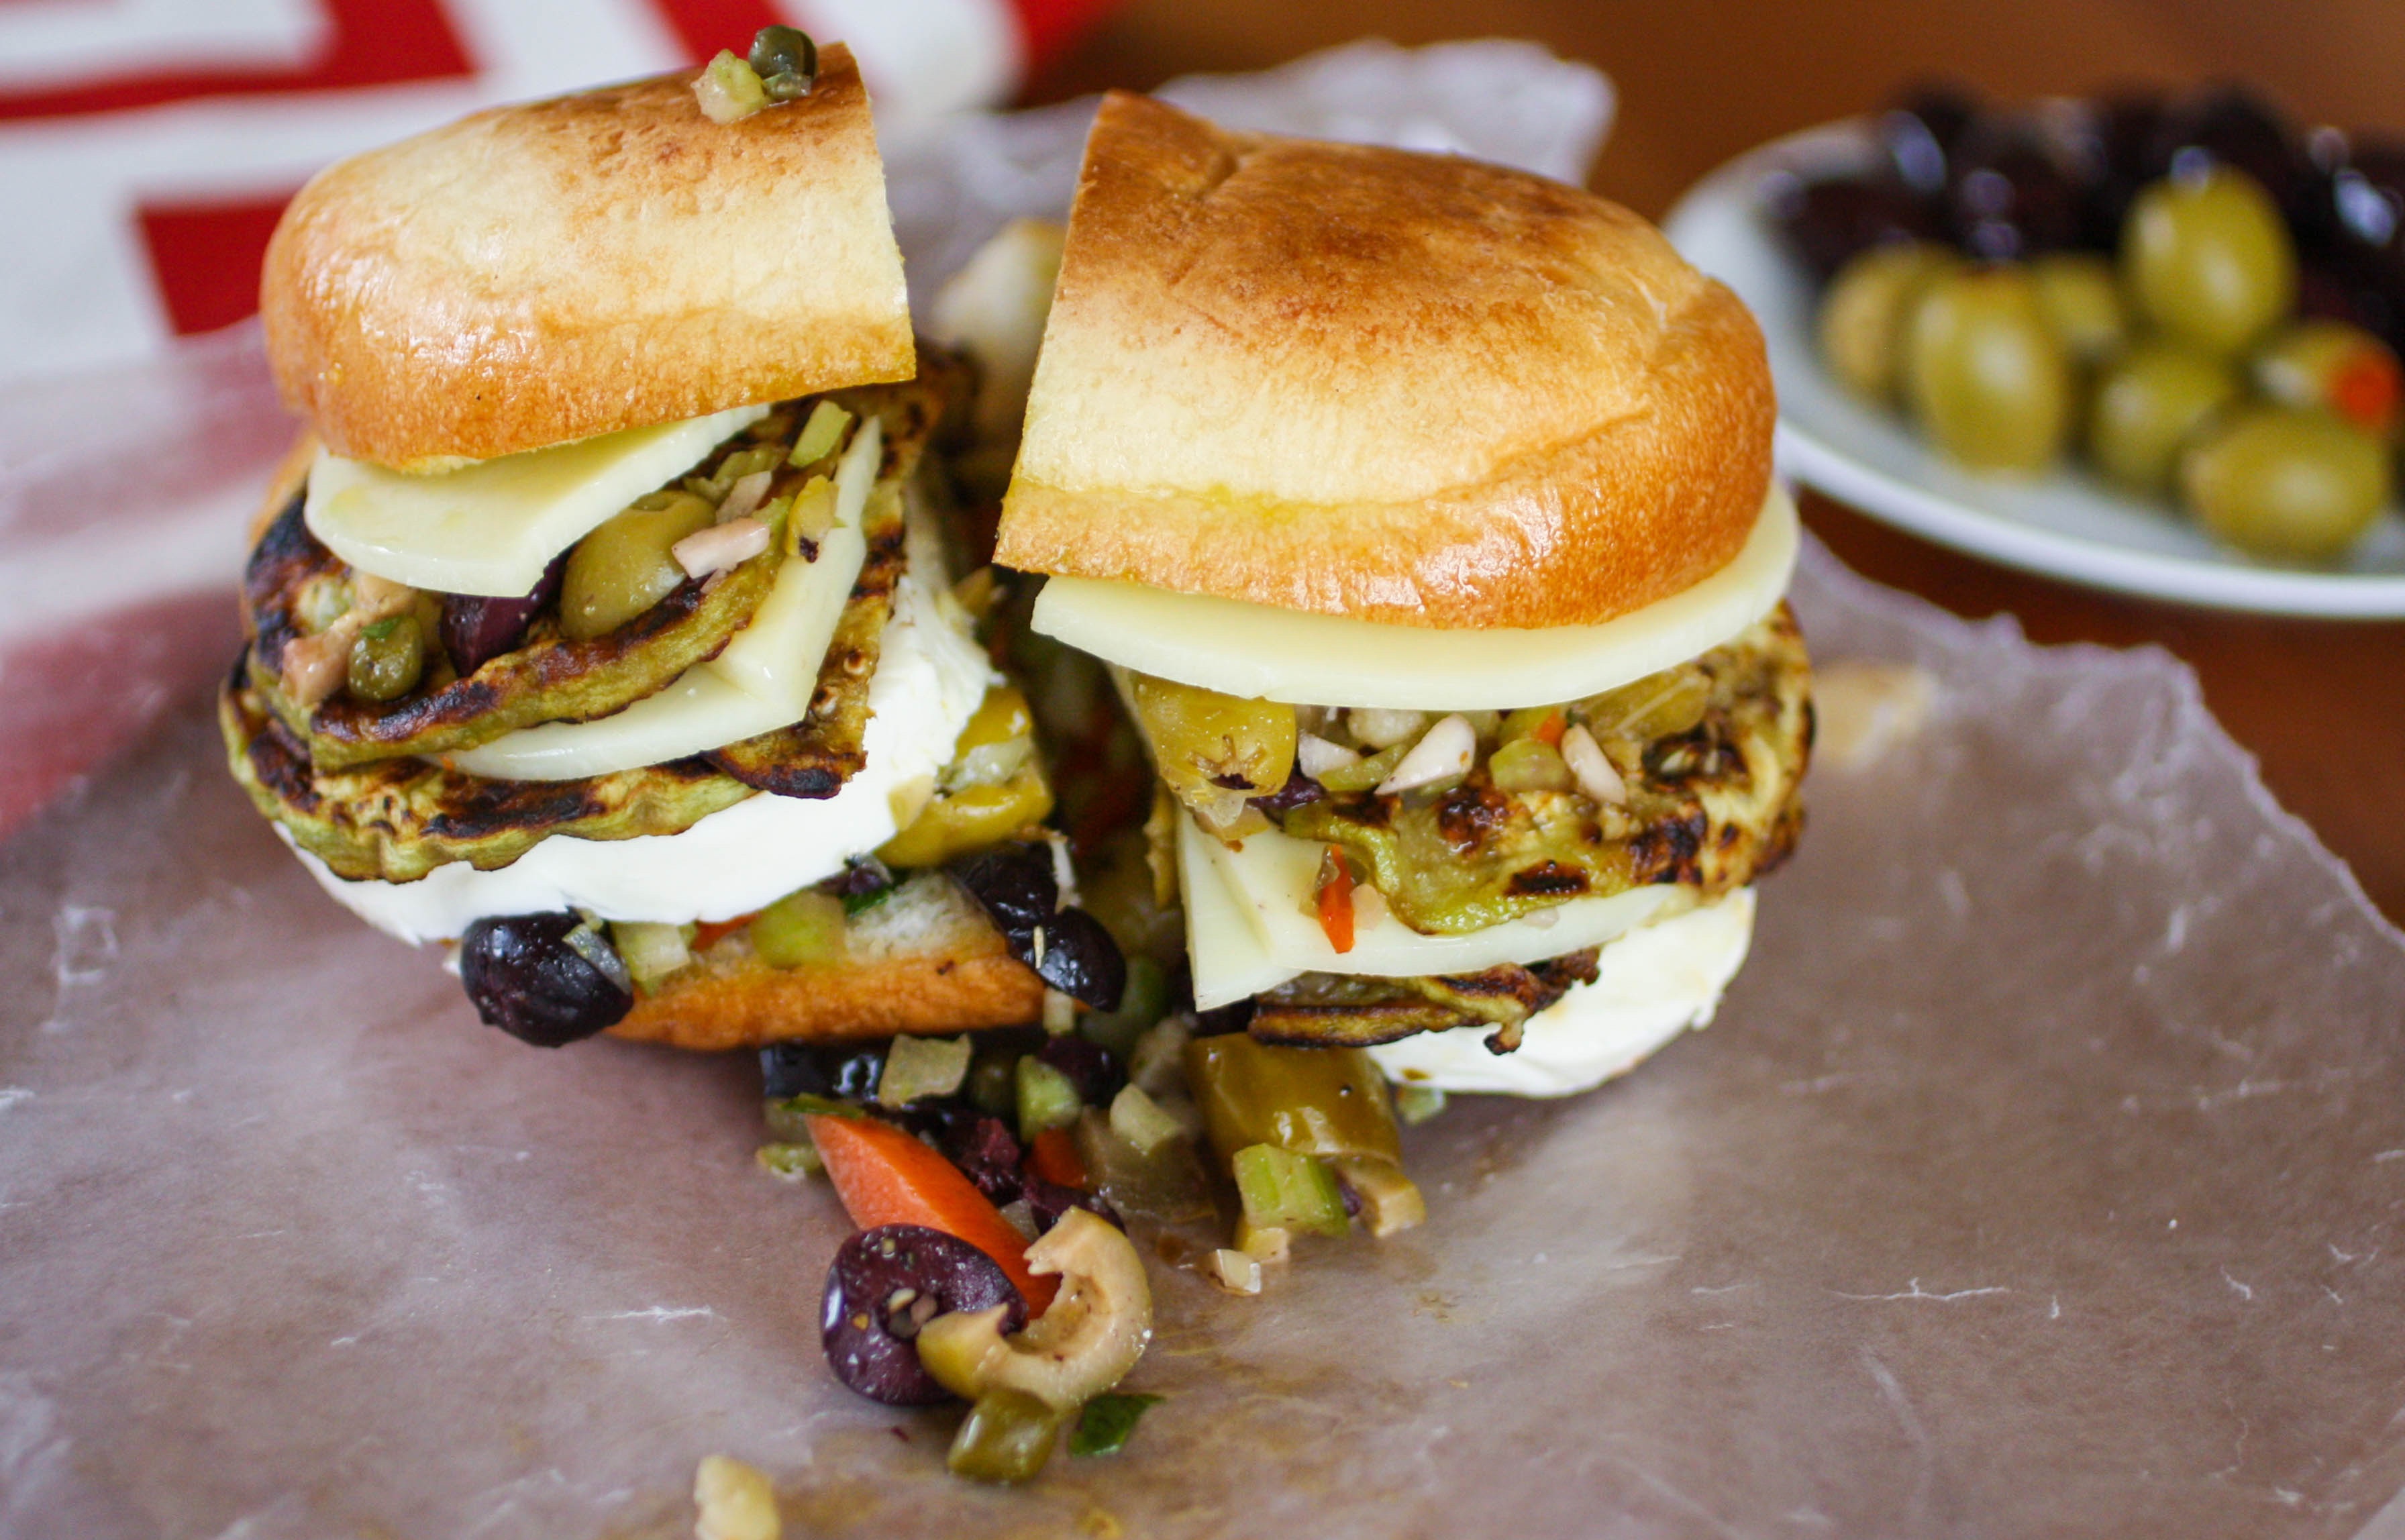 Eggplant Muffuletta Sandwiches are delicious and are a tasty vegetarian take on the classic. You'll love these Eggplant Muffuletta Sandwiches for their big flavor -- what a great vegetarian option!